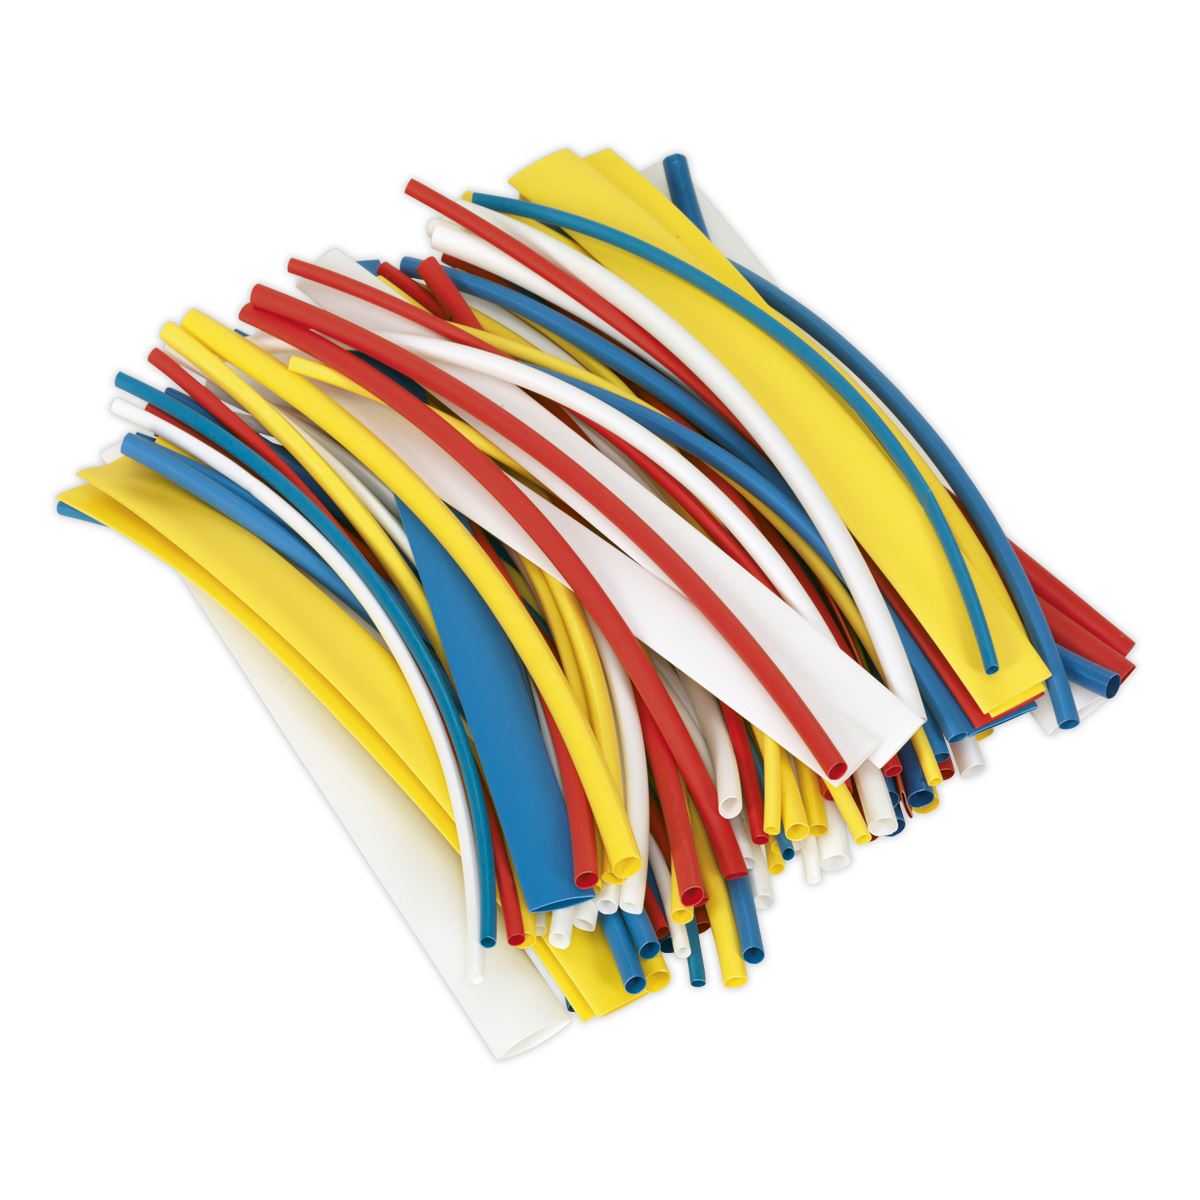 Sealey 200mm Heat Shrink Tubing Mixed Colours - Pack of 100